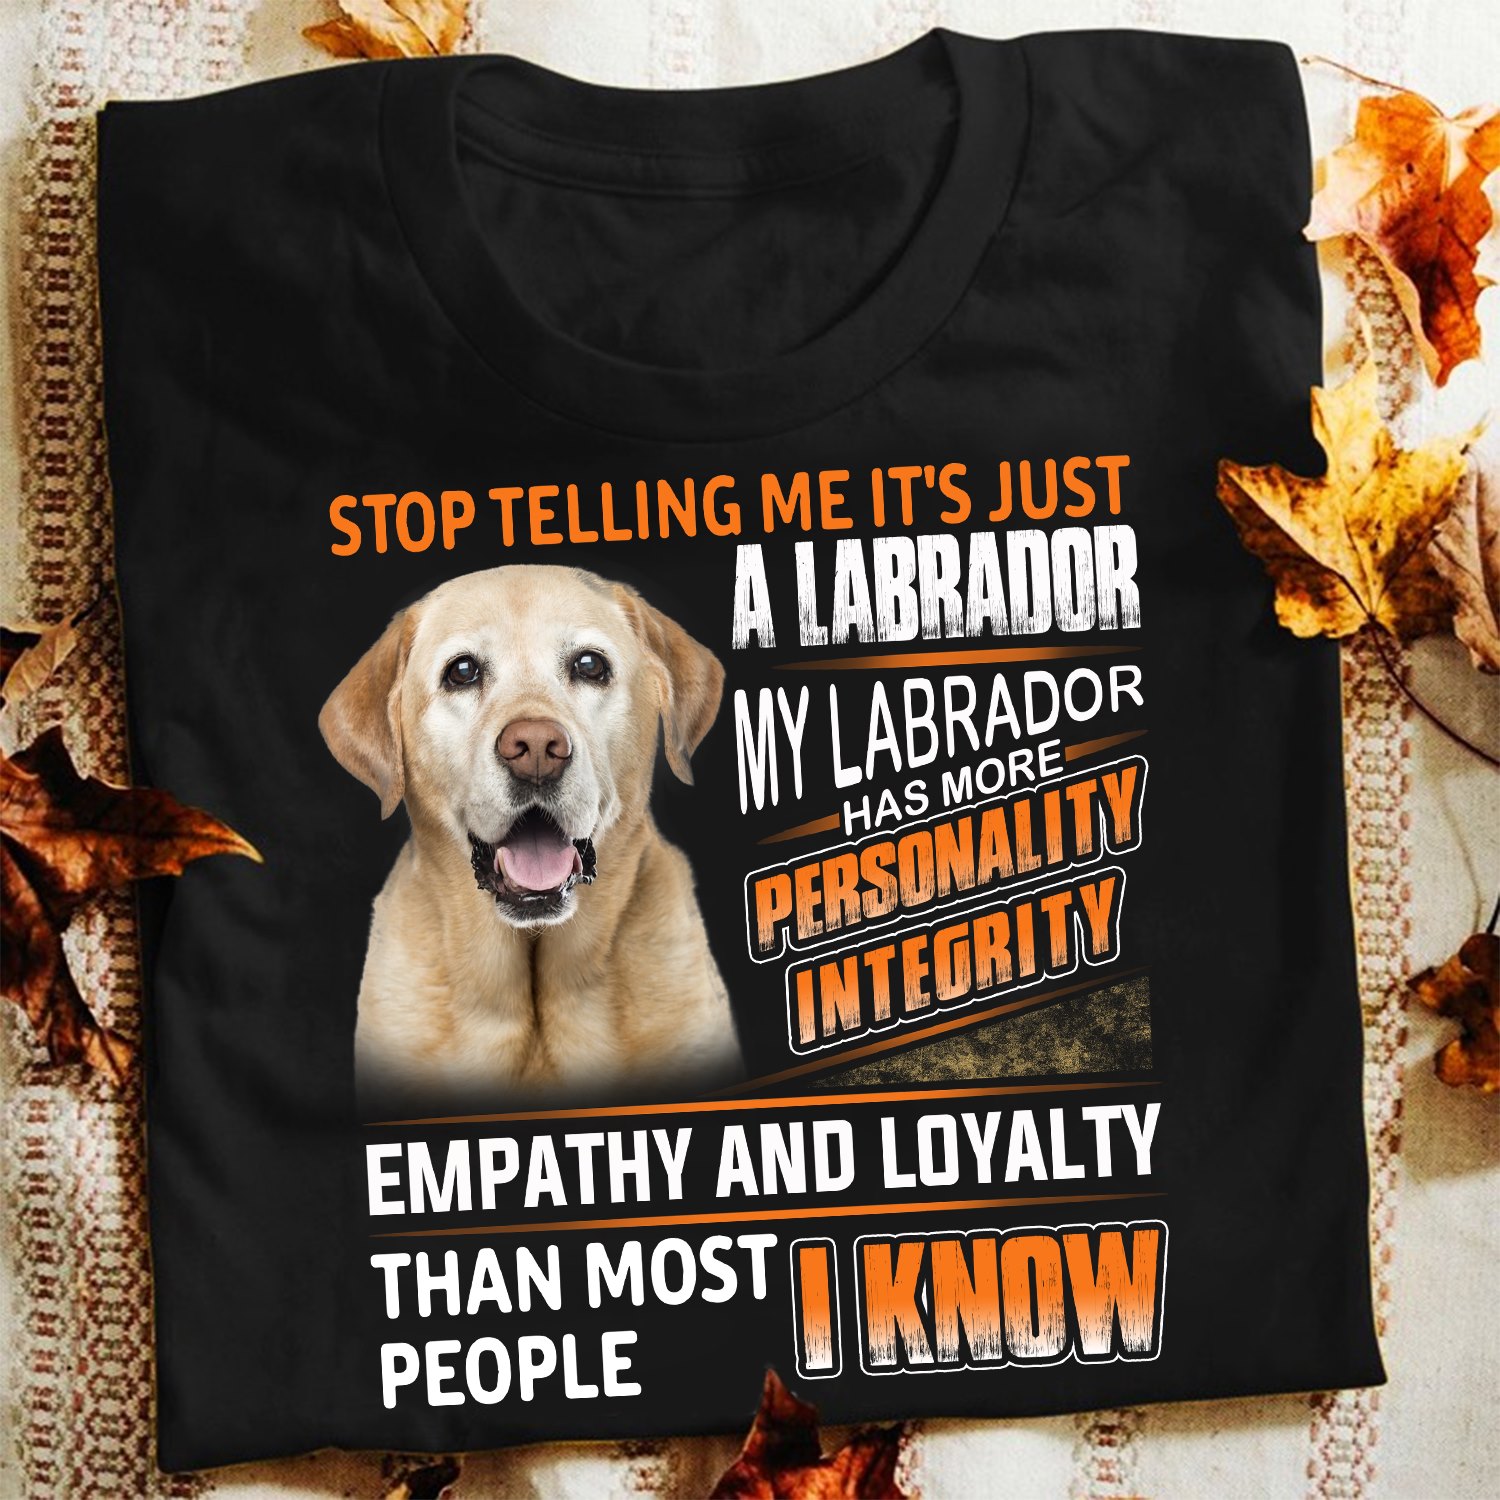 Stop telling me it's just a labrador my labrador has more personality integrity - Dog lover